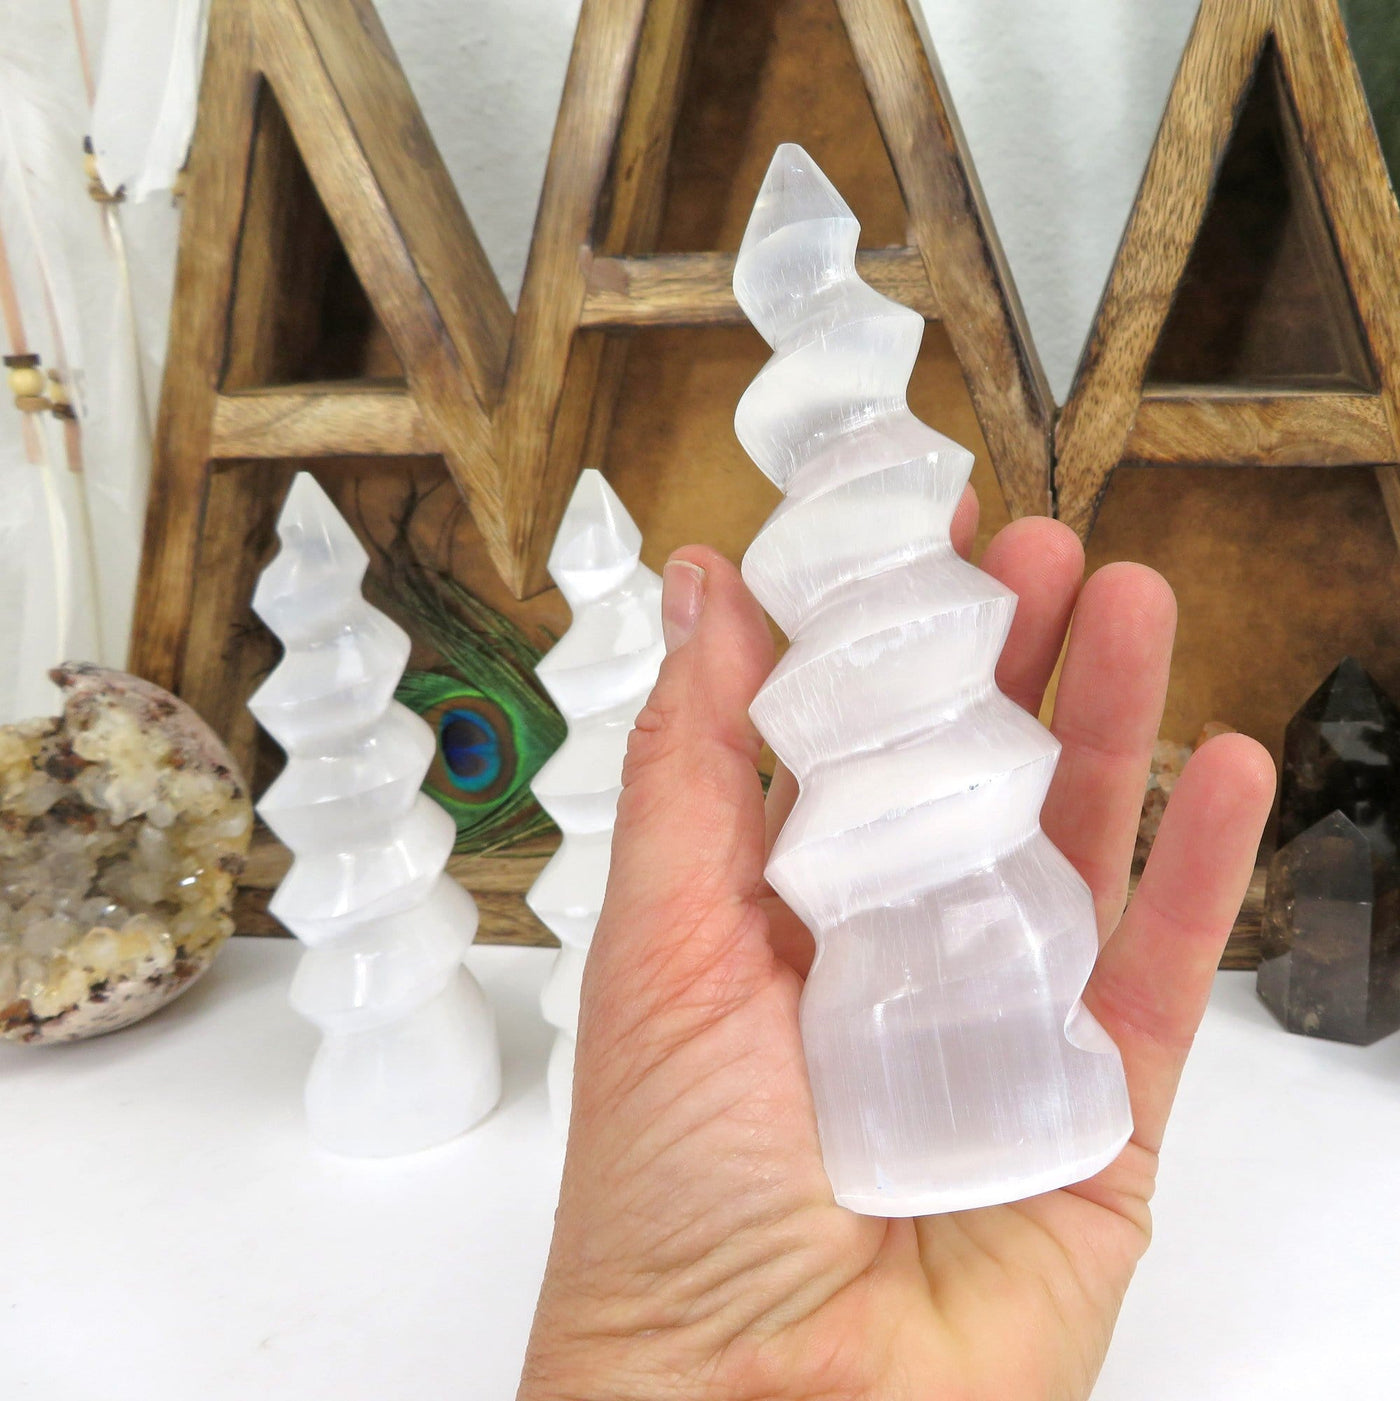 selenite spiral tower in hand for size reference with others in background display